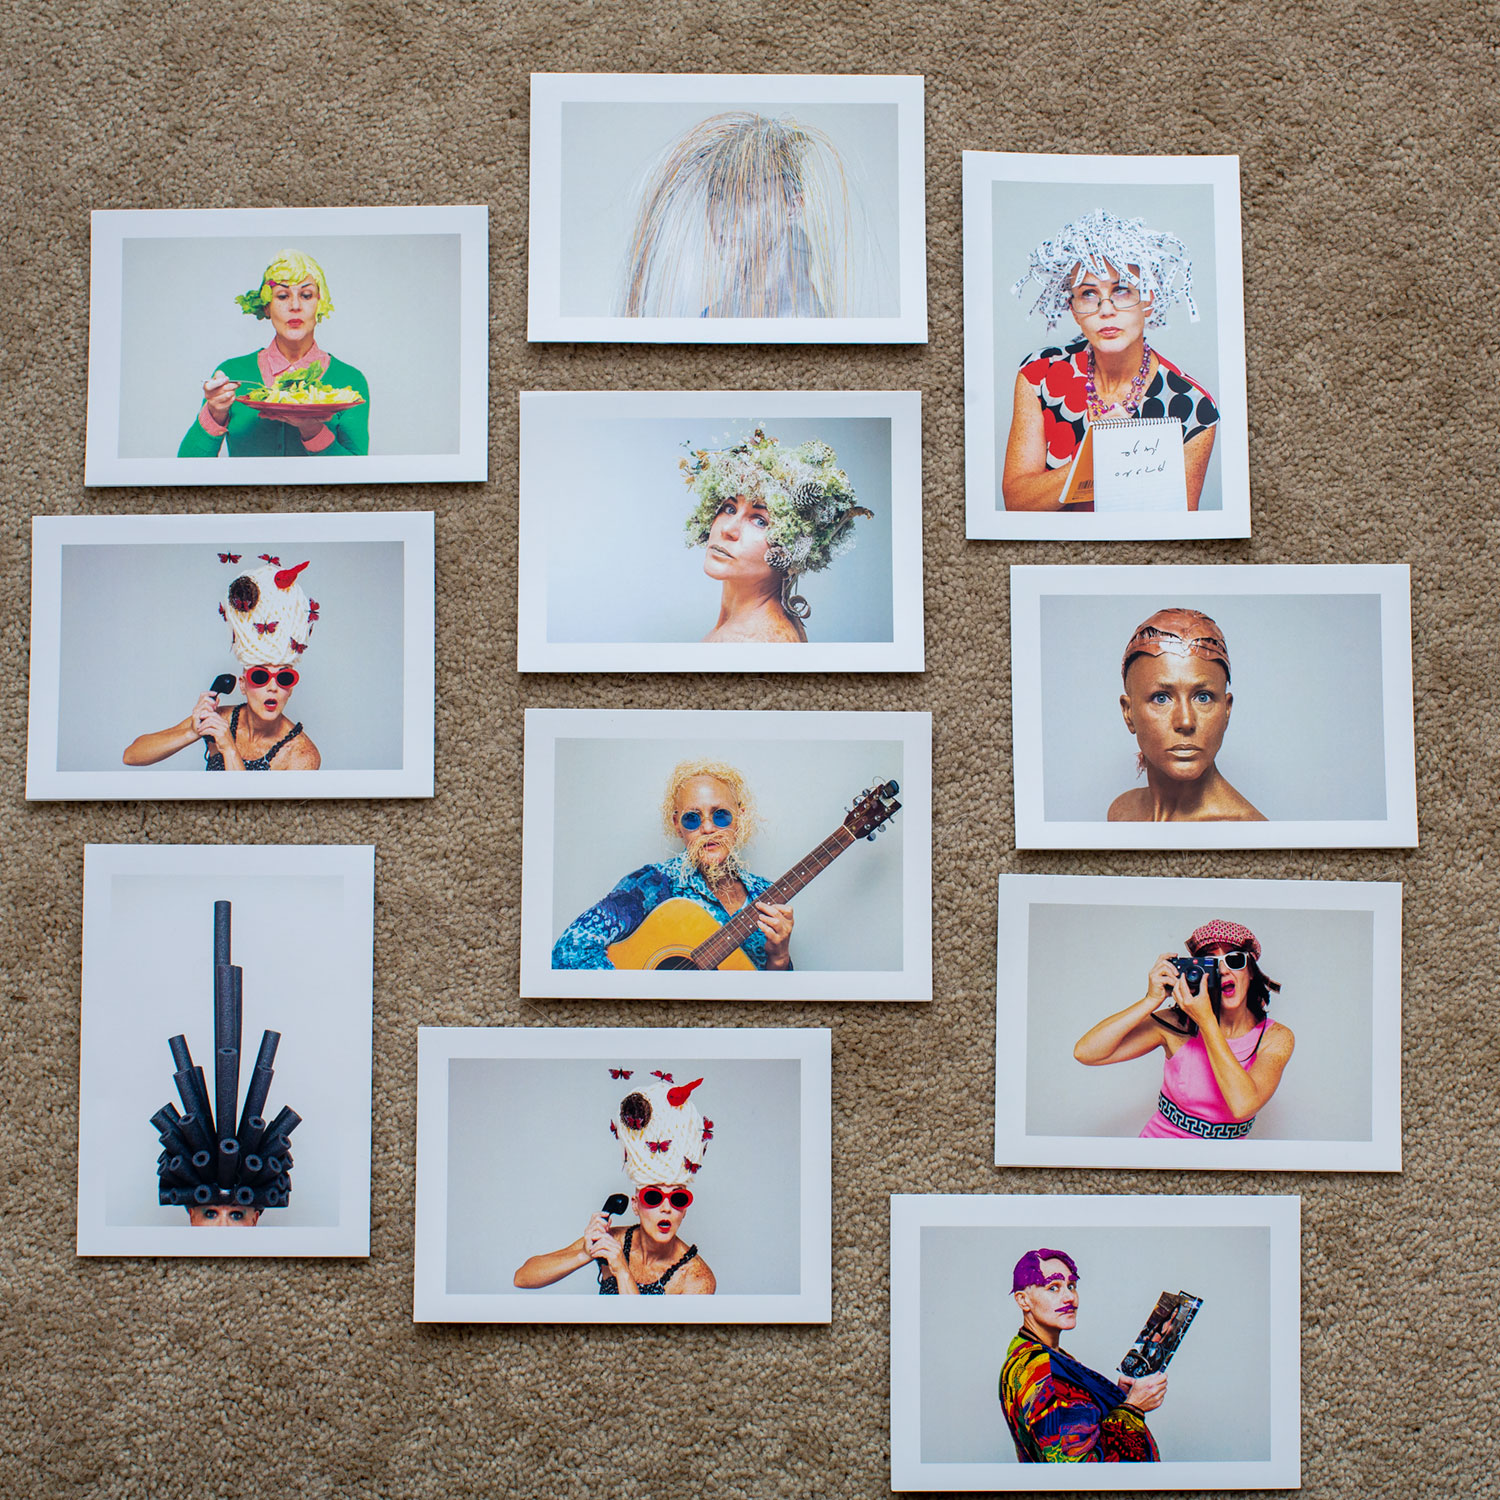 Can you make hair for me 5x7 notecards (10 per box with envelopes) suggested donation $40 at gofundme.com